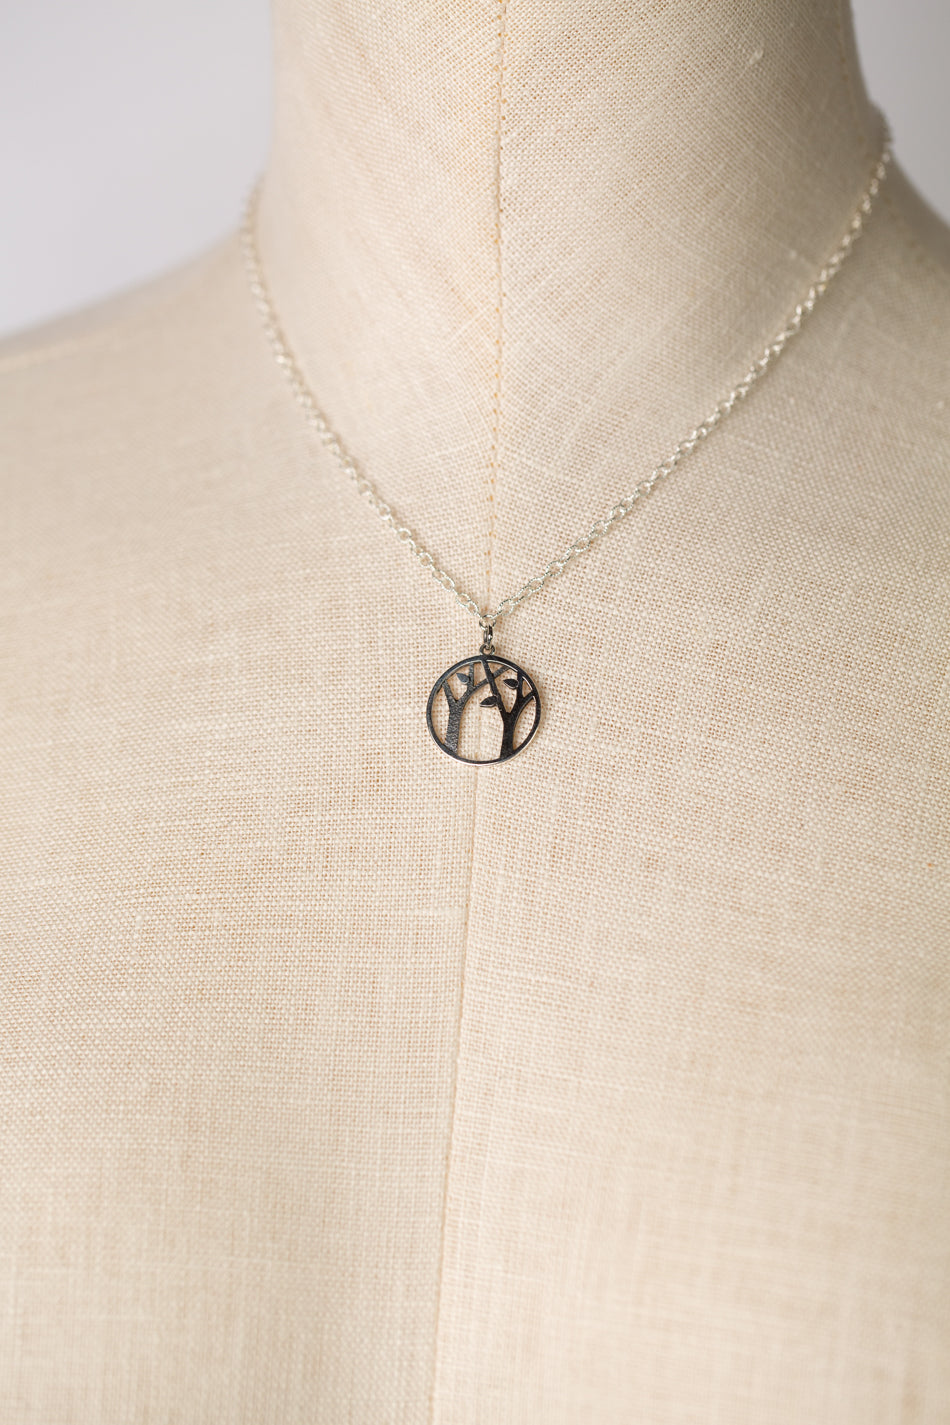 Sterling Tree Life Necklace Silver Ireland | The Shepherd's Knot